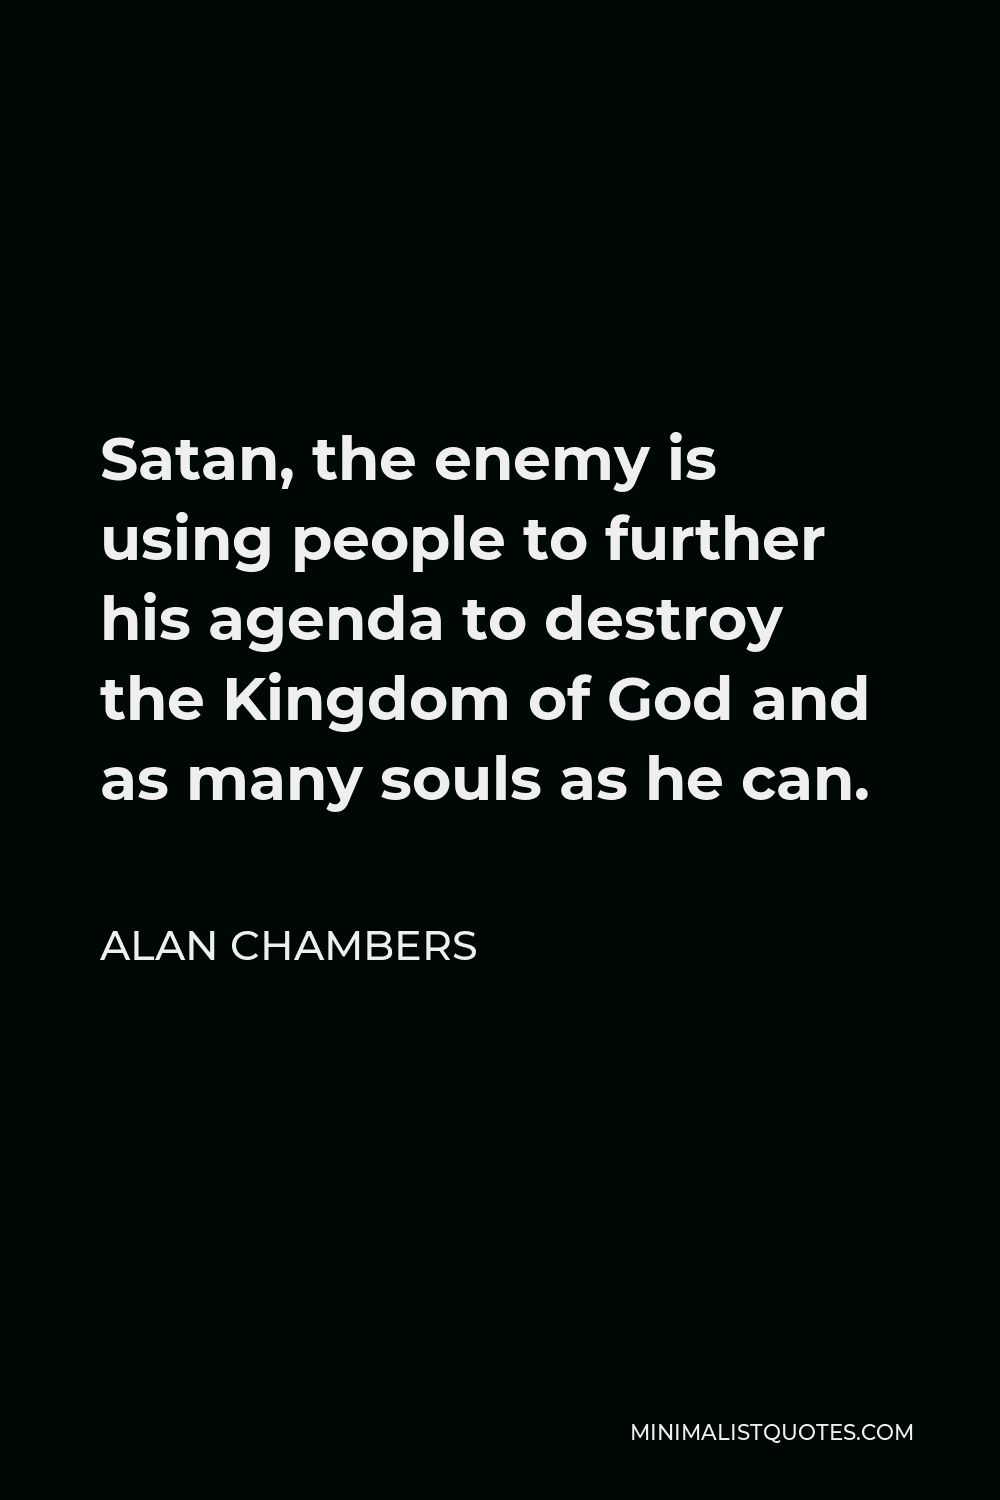 Alan Chambers Quote - Satan, the enemy is using people to further his agenda to destroy the Kingdom of God and as many souls as he can.